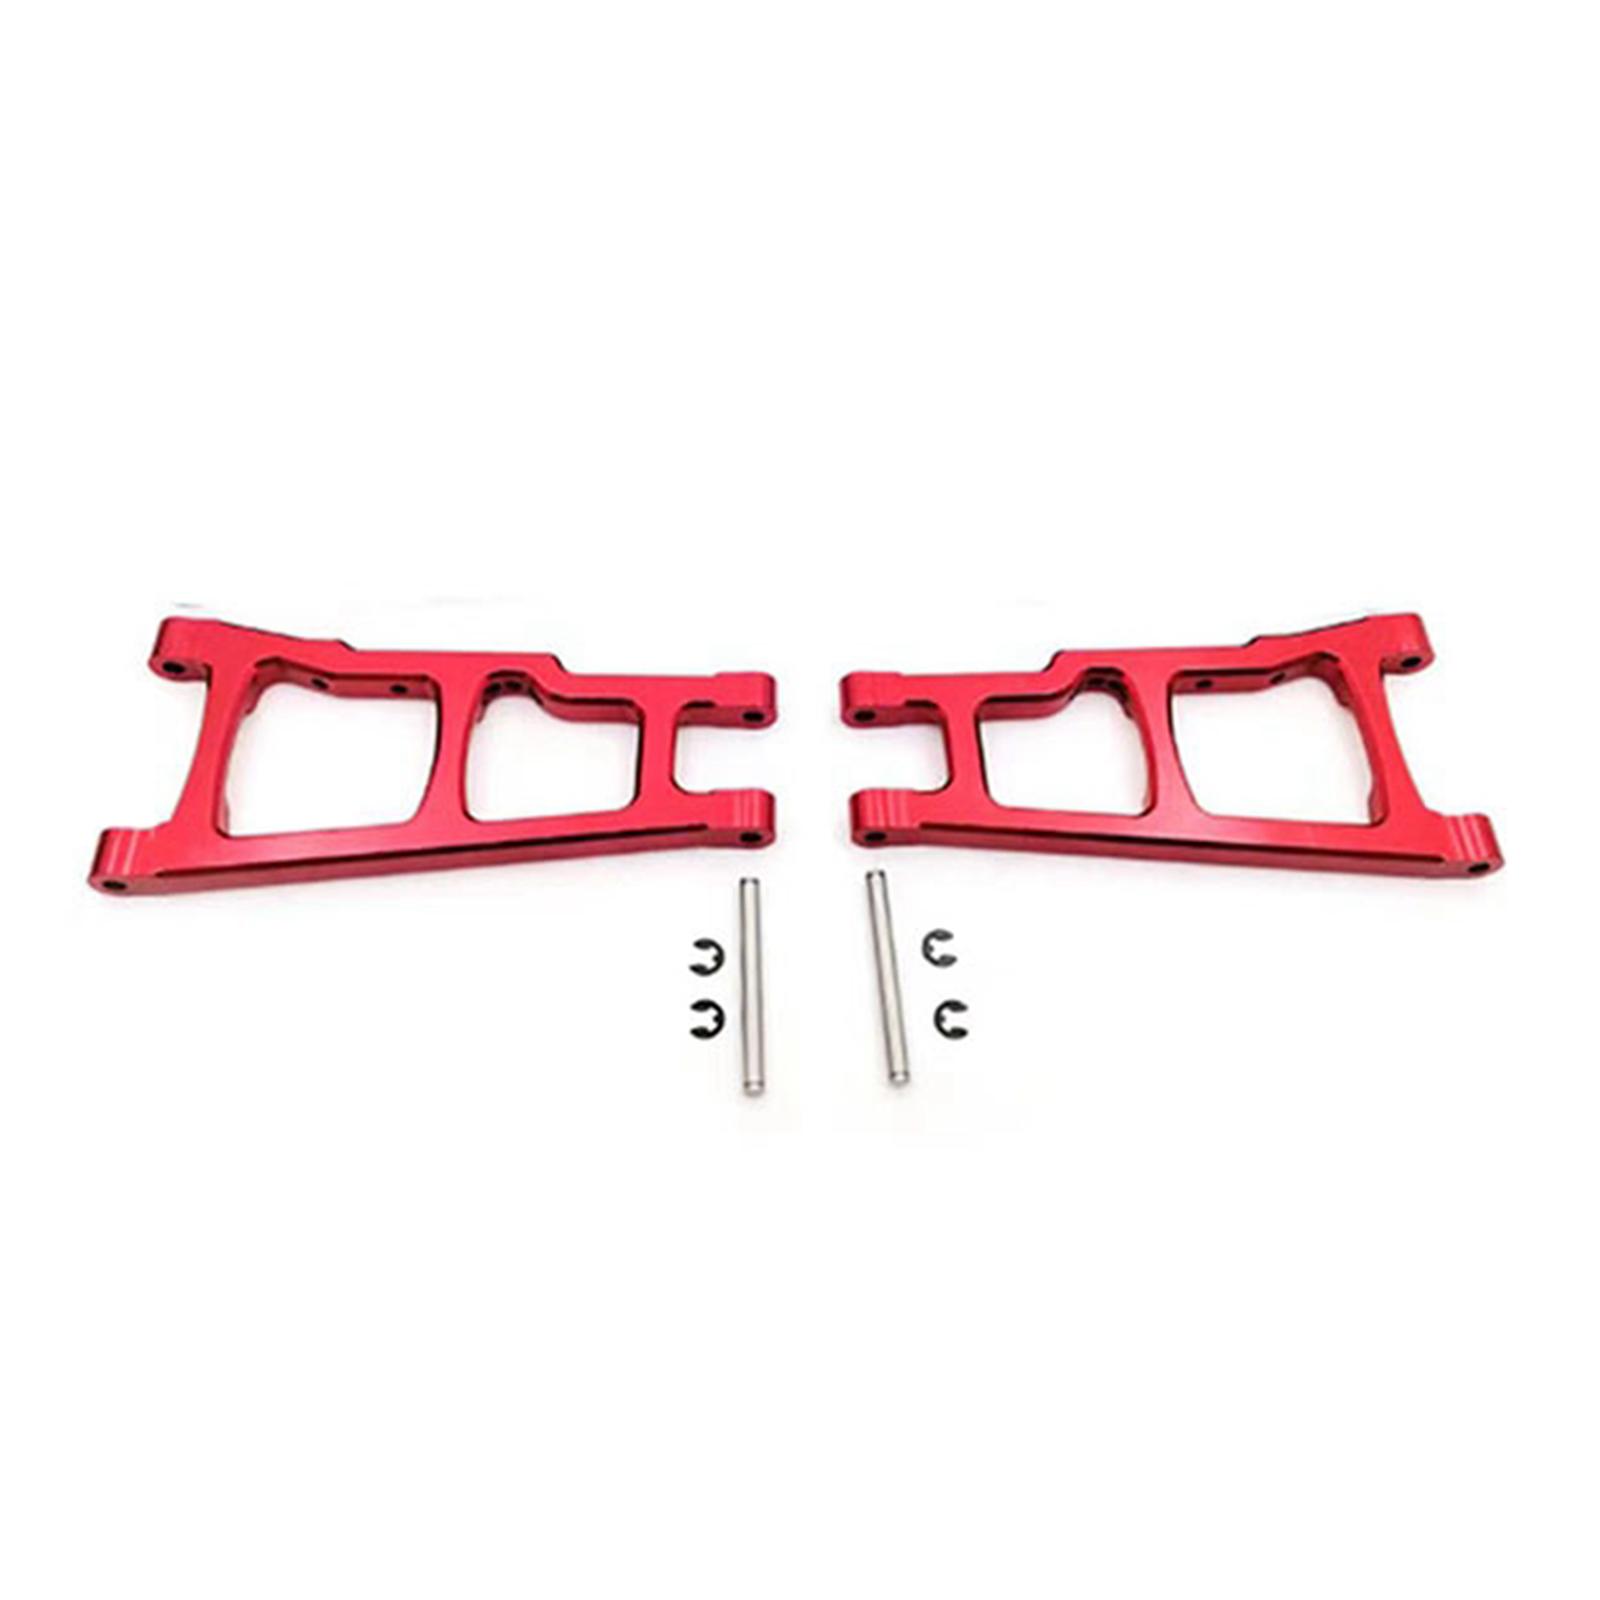 Part & Accessory Chassis Parts for Slash 4X4 HQ727 1/10 RC Truck Red